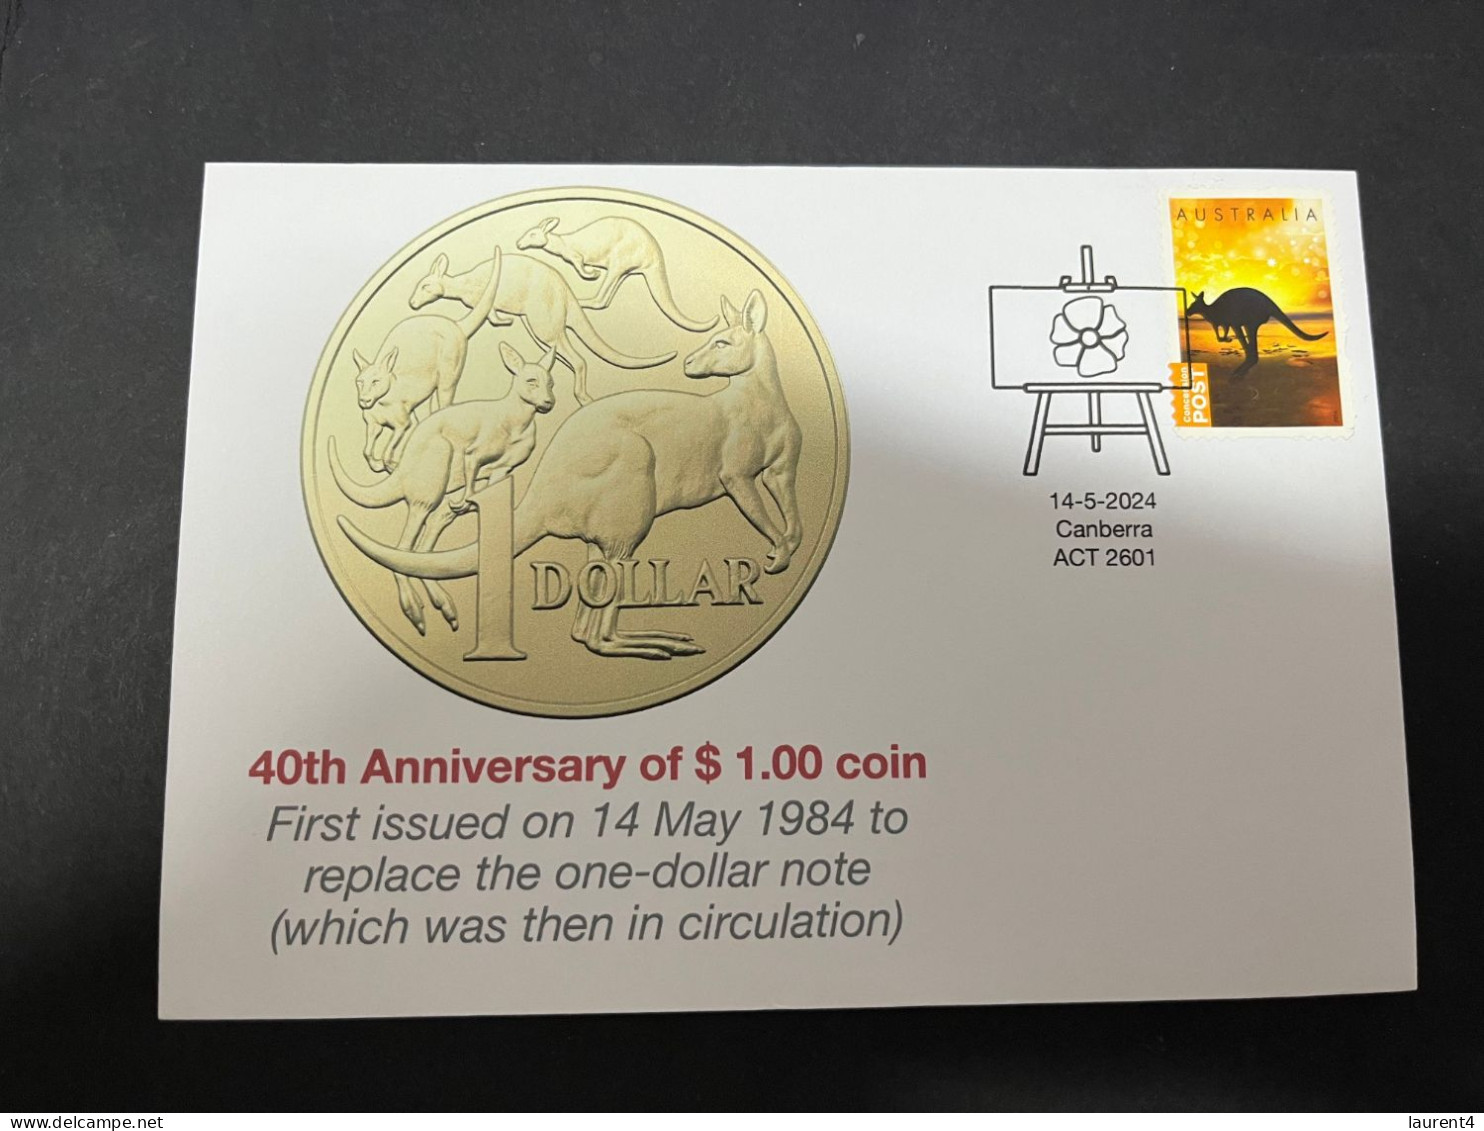 15-5-2024 (5 Z 12) Australia - 40th Anniversary Of The $ 1.00 Coin Released For 1st Time In Australia On 14-5-1984 - Coins